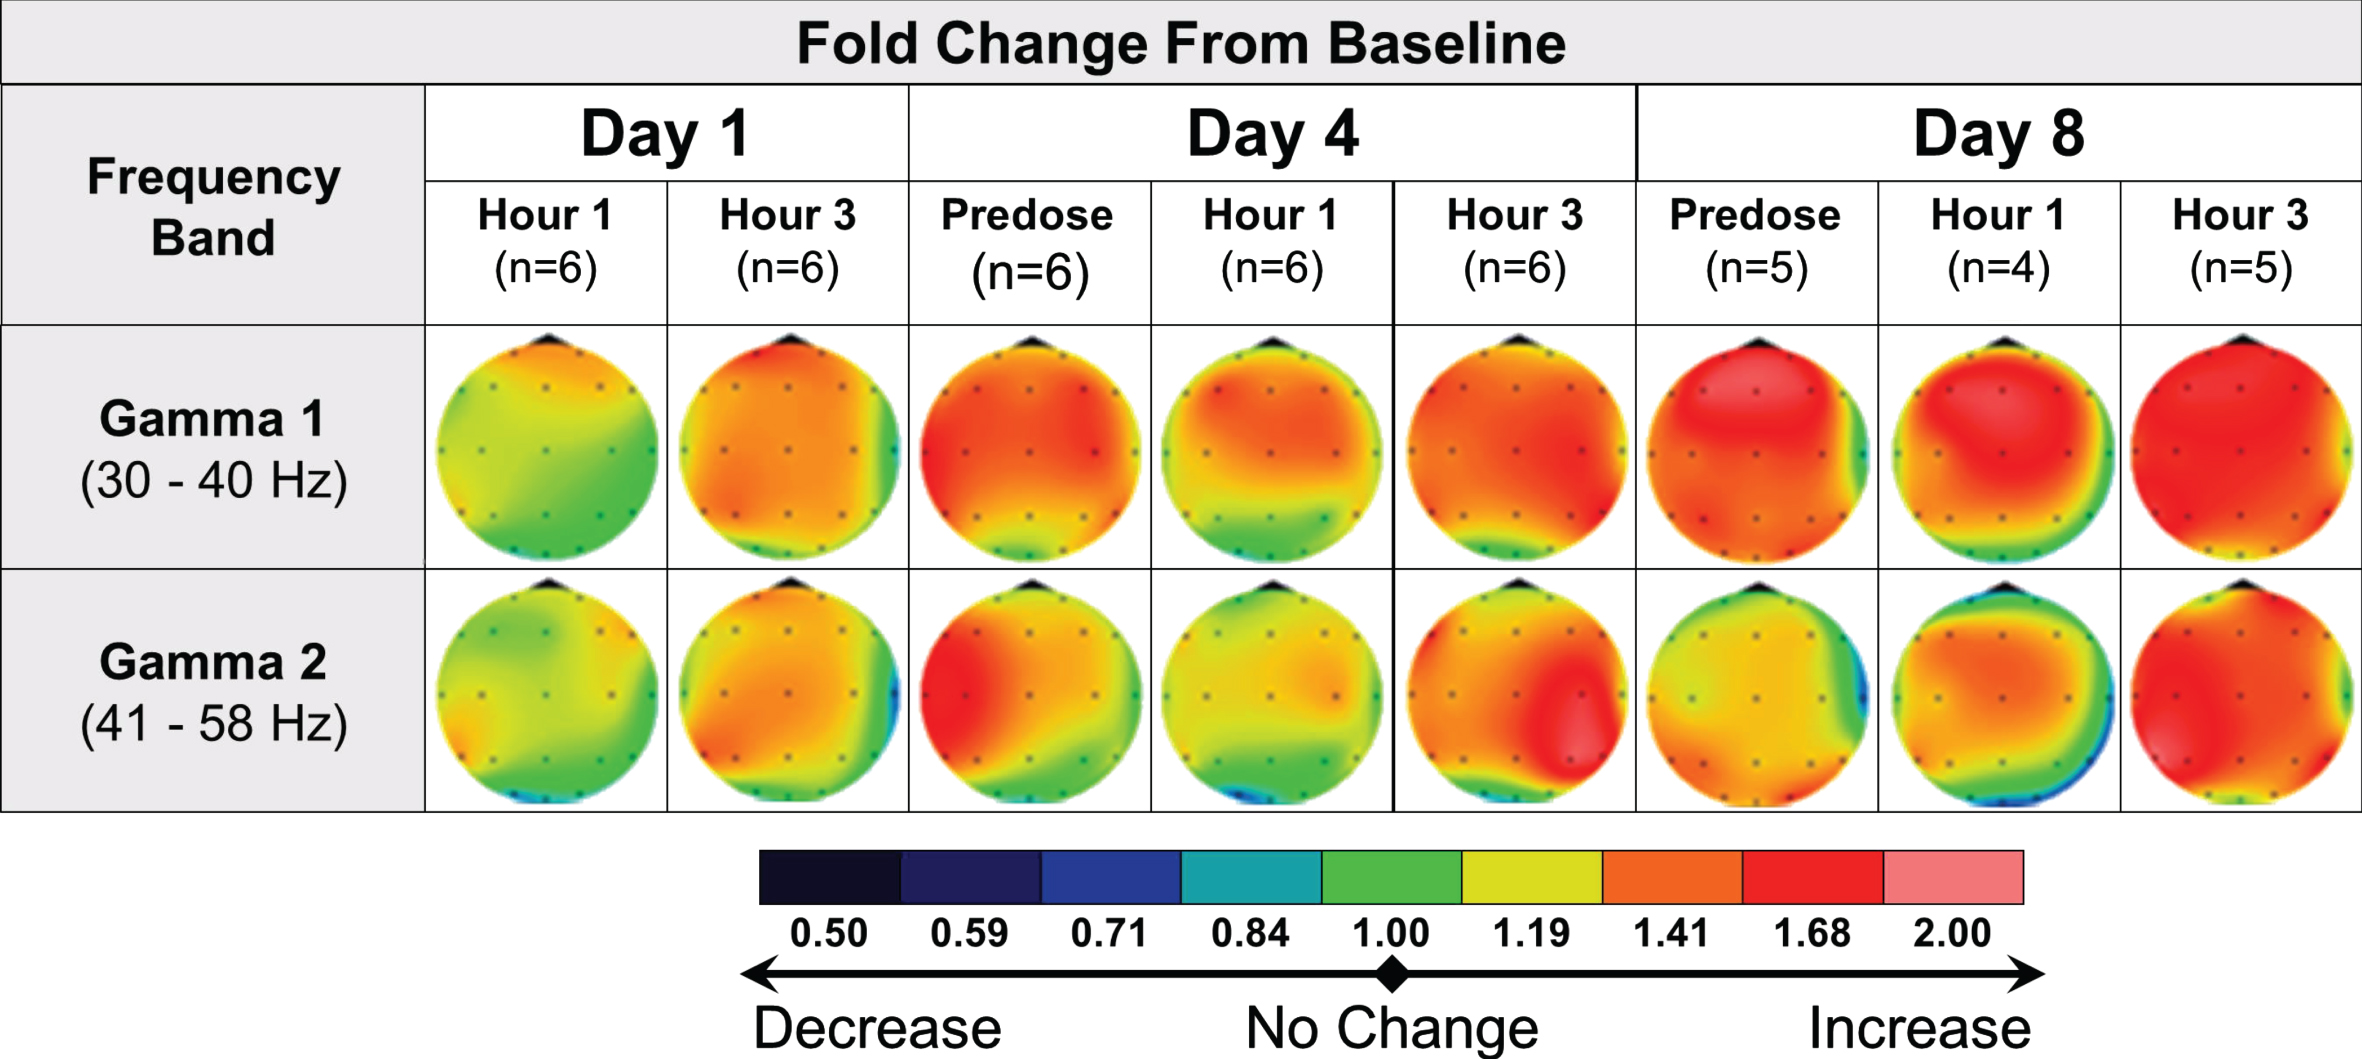 Acute and sustained increase in qEEG gamma induction in healthy elderly subjects receiving multiple doses of fosgonimeton at 20 mg (SC, OD, 9 days). qEEG assessments were conducted at predose, and 1 hour and 3 hours postdose, on days 1, 4, and 8. The heat maps illustrate the average change in relative qEEG power from baseline (day 1 predose) to each qEEG recording after treatment start (change from study baseline ratio). Only gamma power shown; fosgonimeton did not induce consistent and substantial changes in any other waveform. OD, once daily; qEEG, quantitative electroencephalogram; SC, subcutaneous.